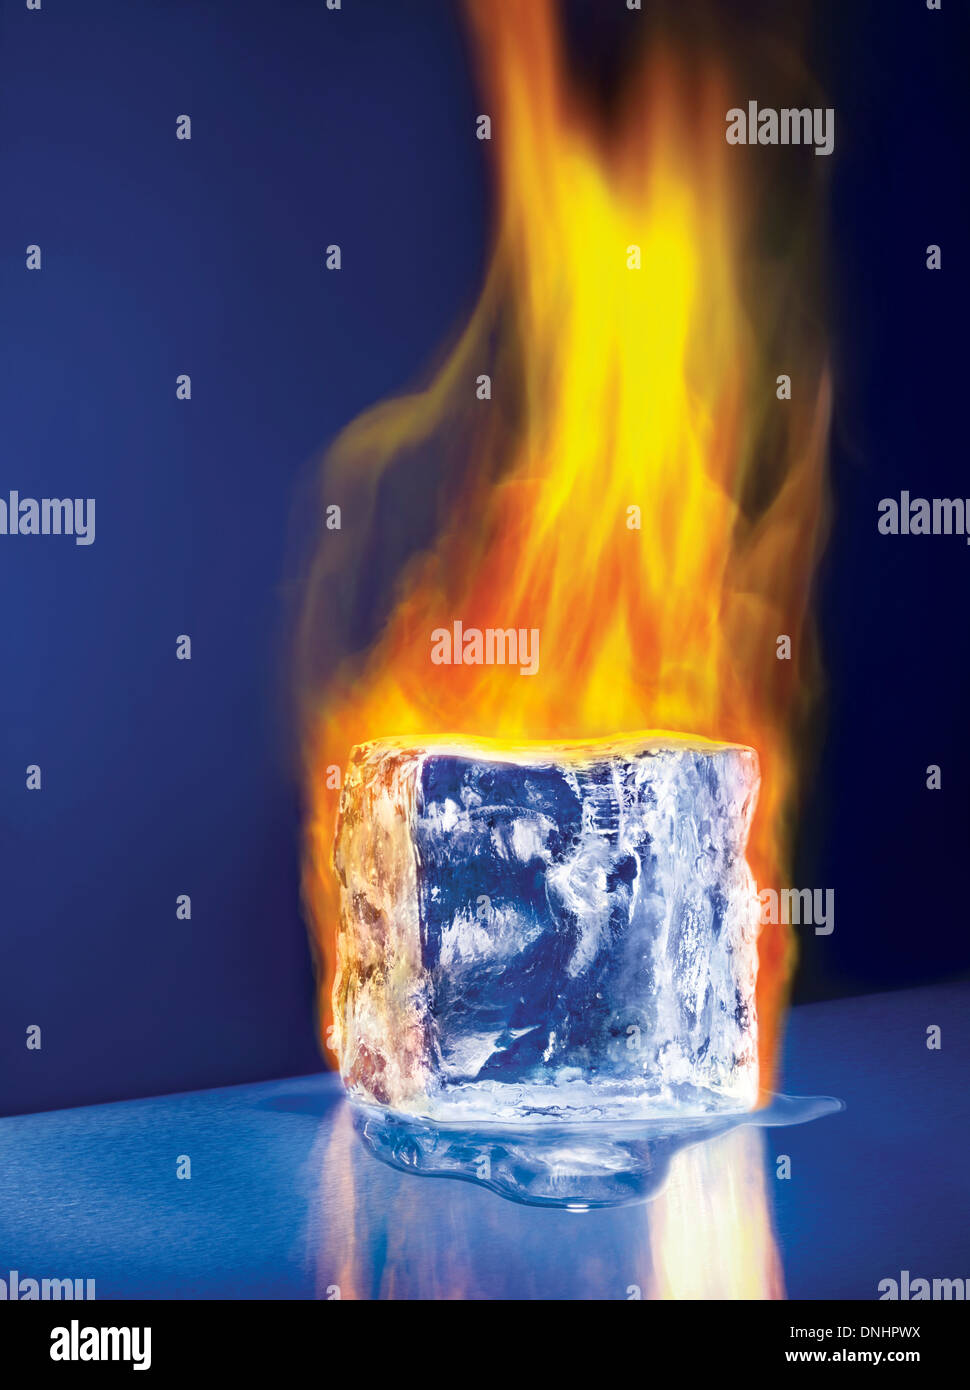 A large melting ice block cube on fire. Stock Photo